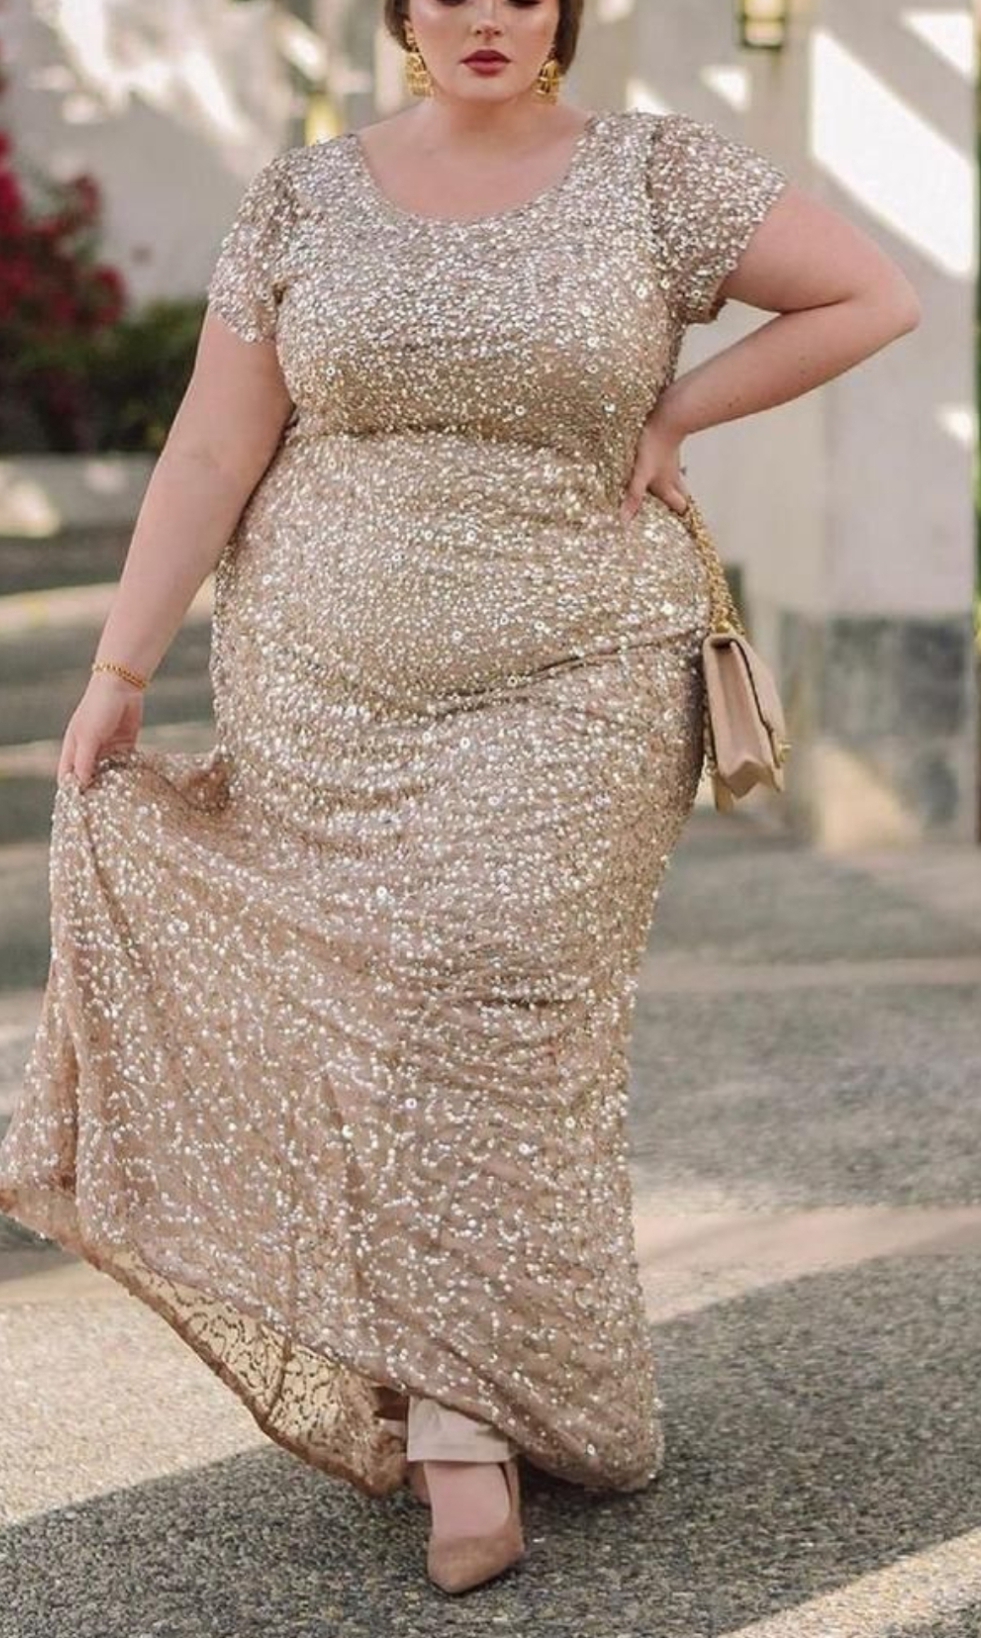 Best New Year Eve's dresses for plus size women